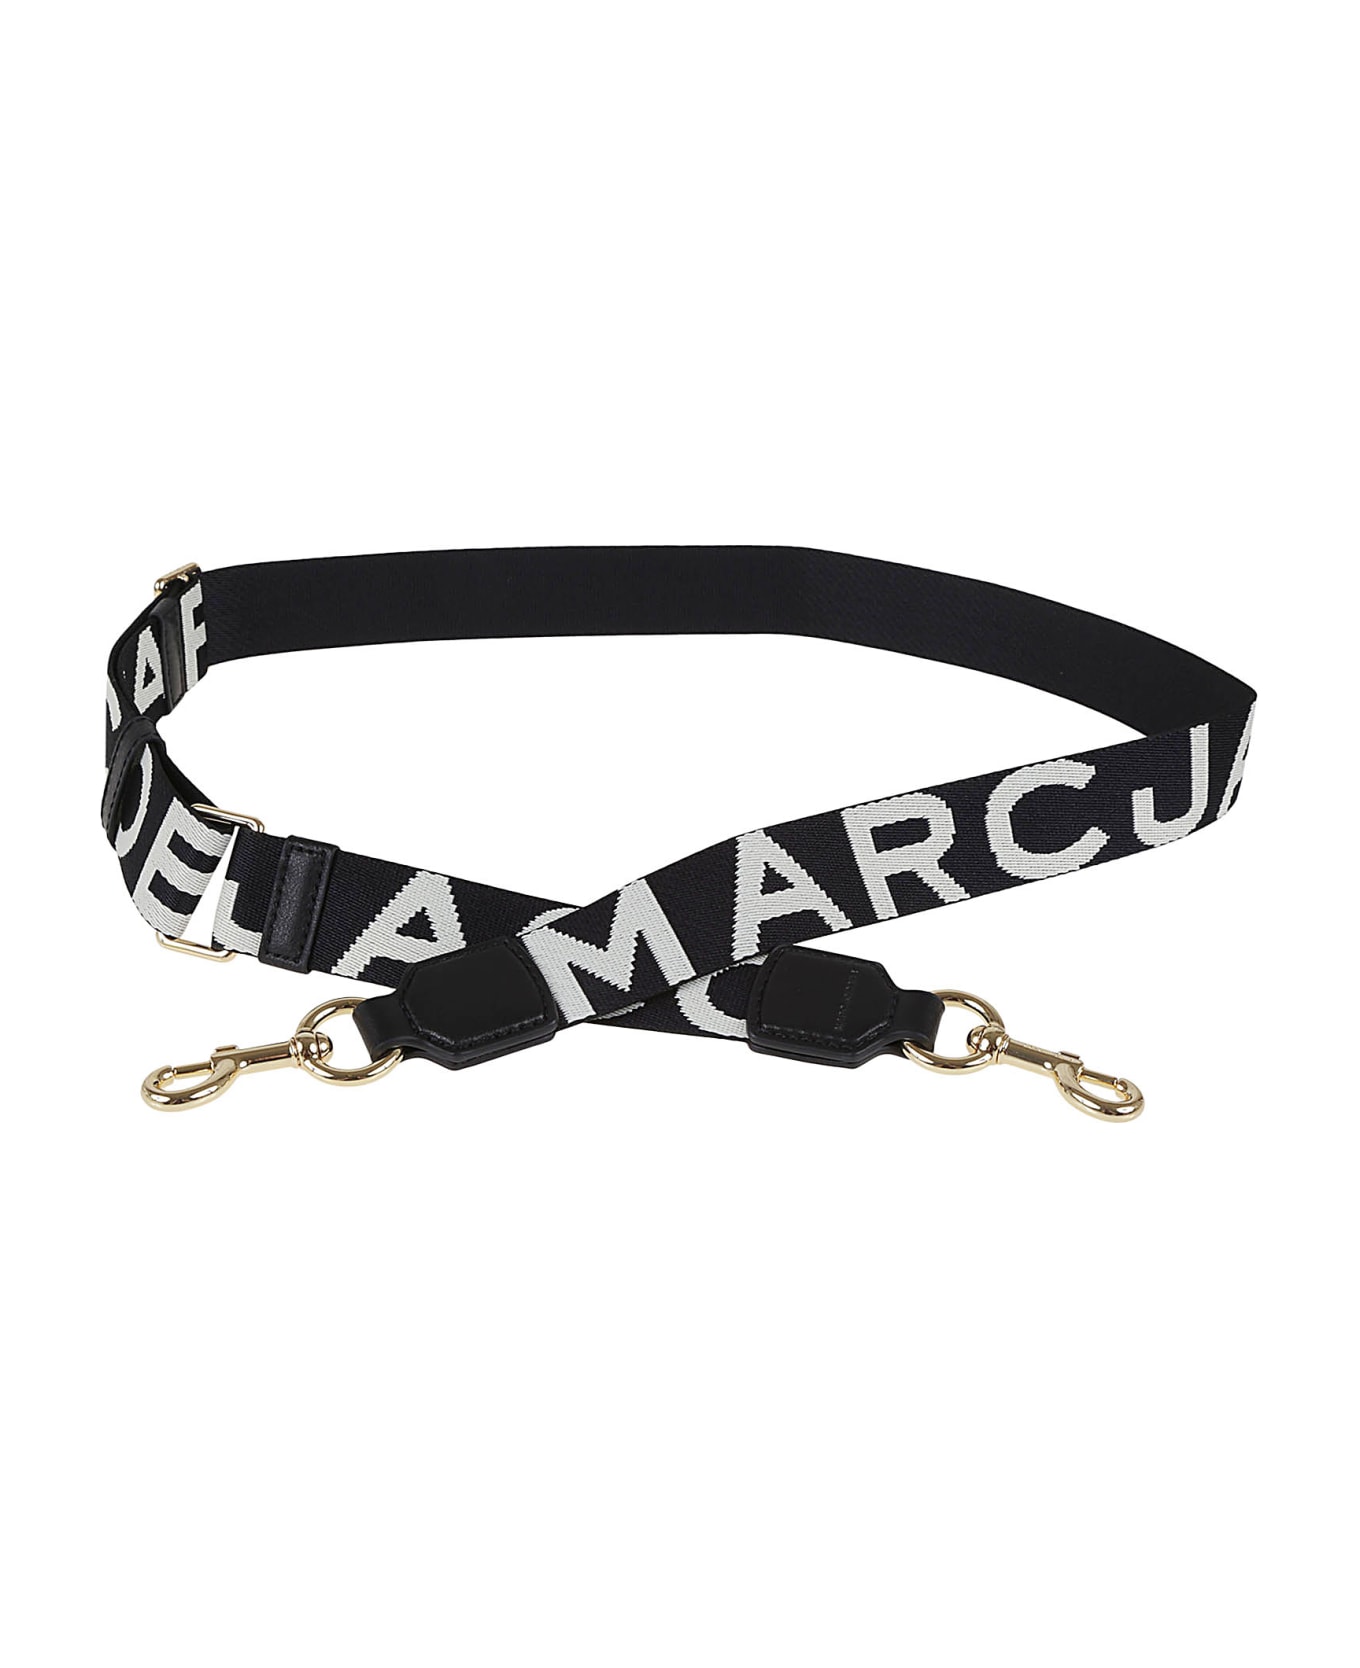 Marc Jacobs 'the Thin Strap' Shoulder Strap - Black White バッグ